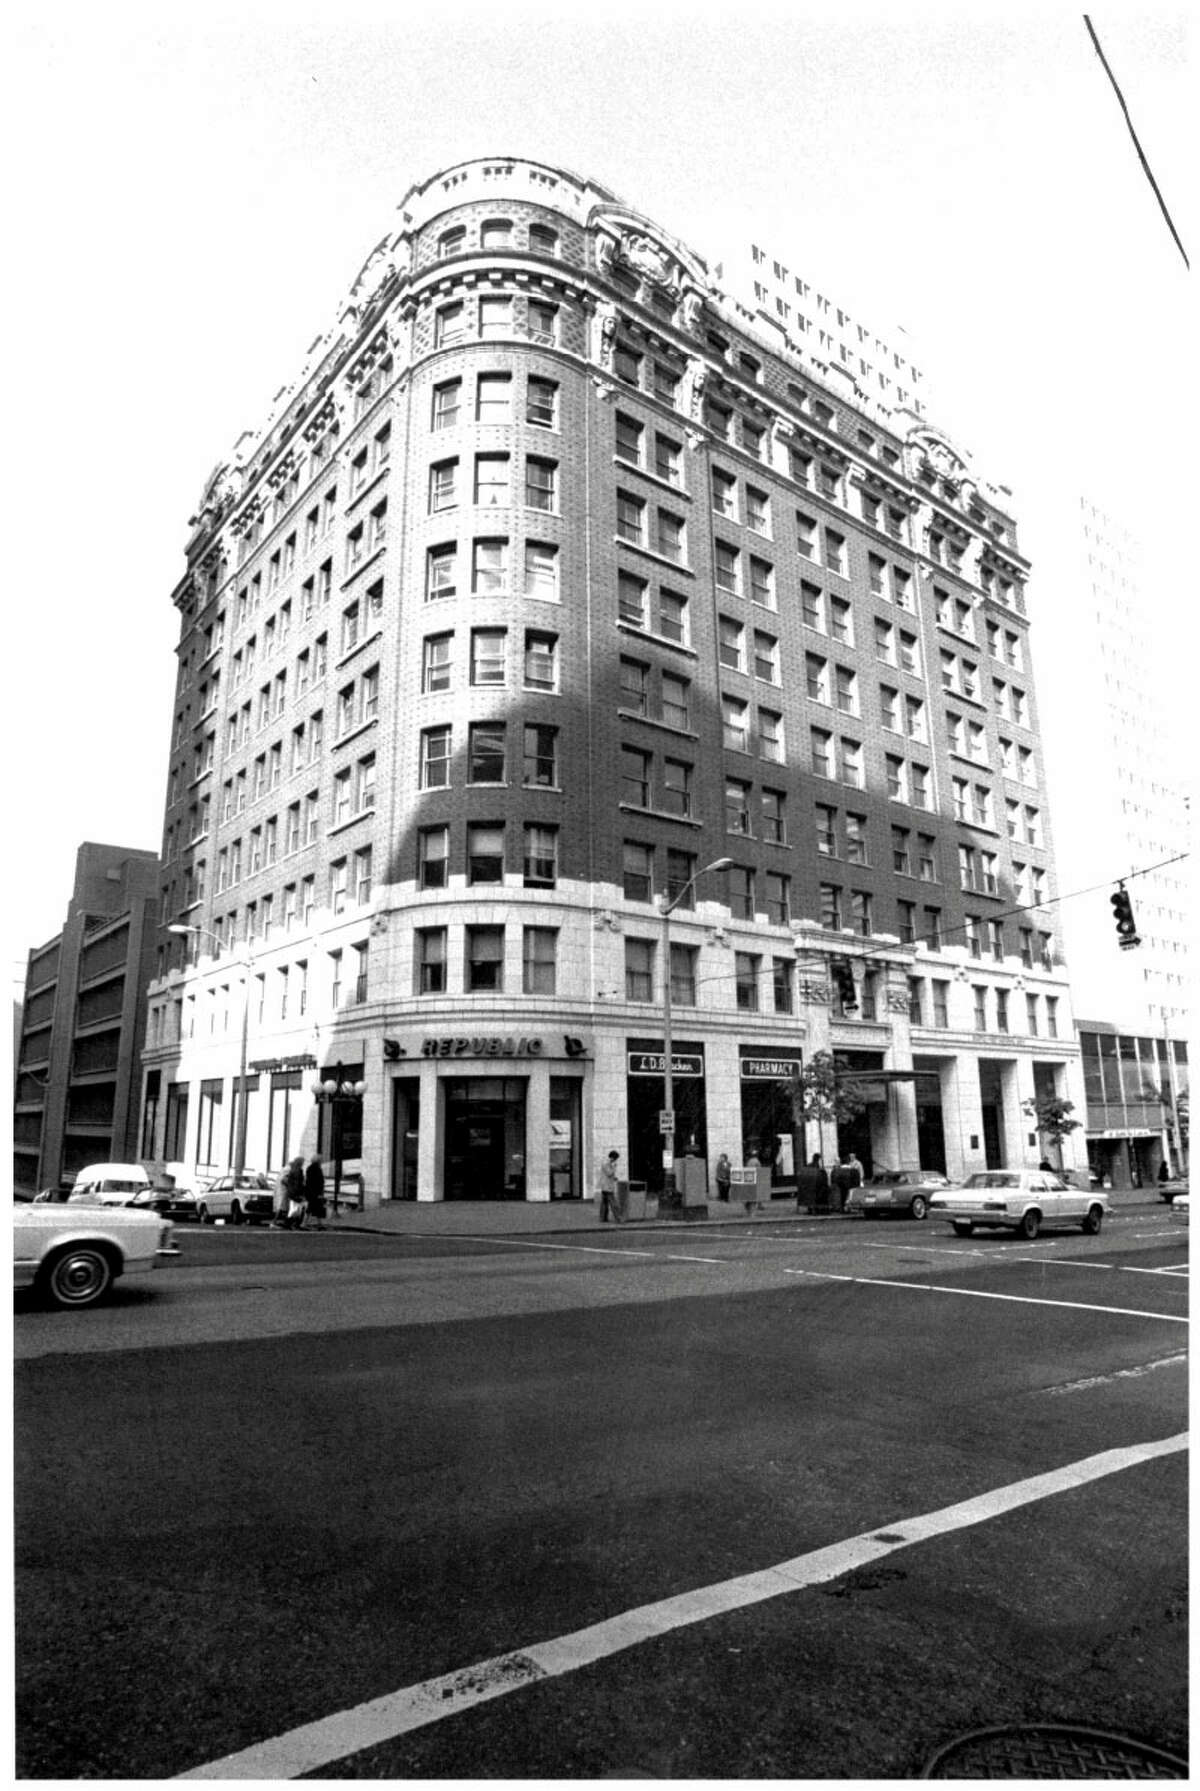 Cobb Building -- 1301-1309 4th Ave. – Added to the National Register of Historic Places on Aug. 3, 1984.